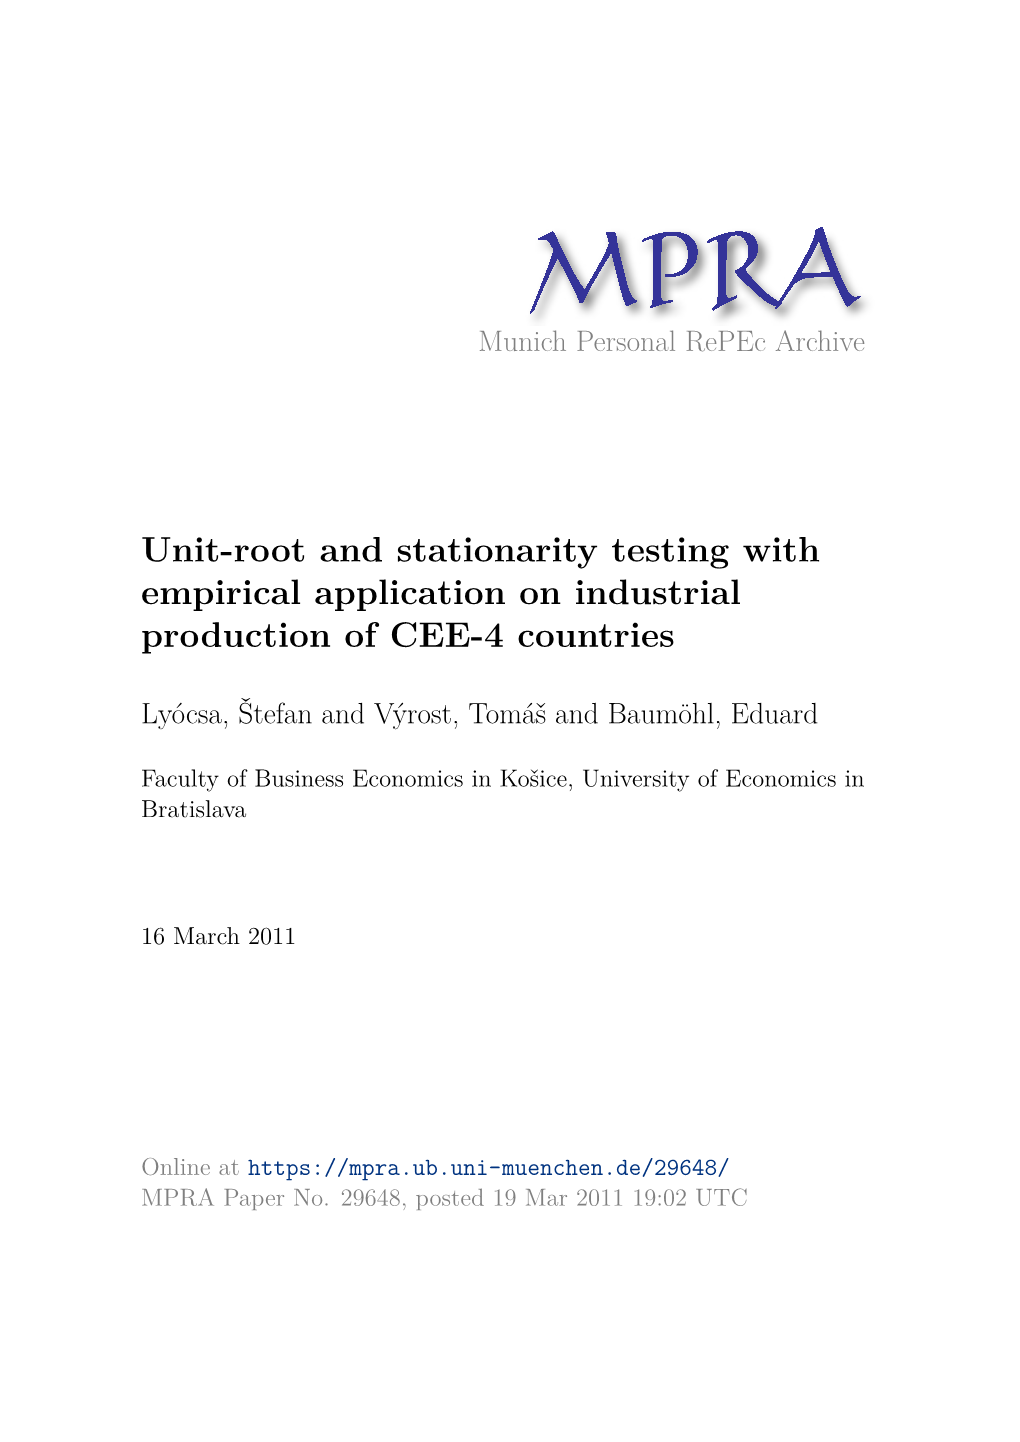 Unit-Root and Stationarity Testing with Empirical Application on Industrial Production of CEE-4 Countries